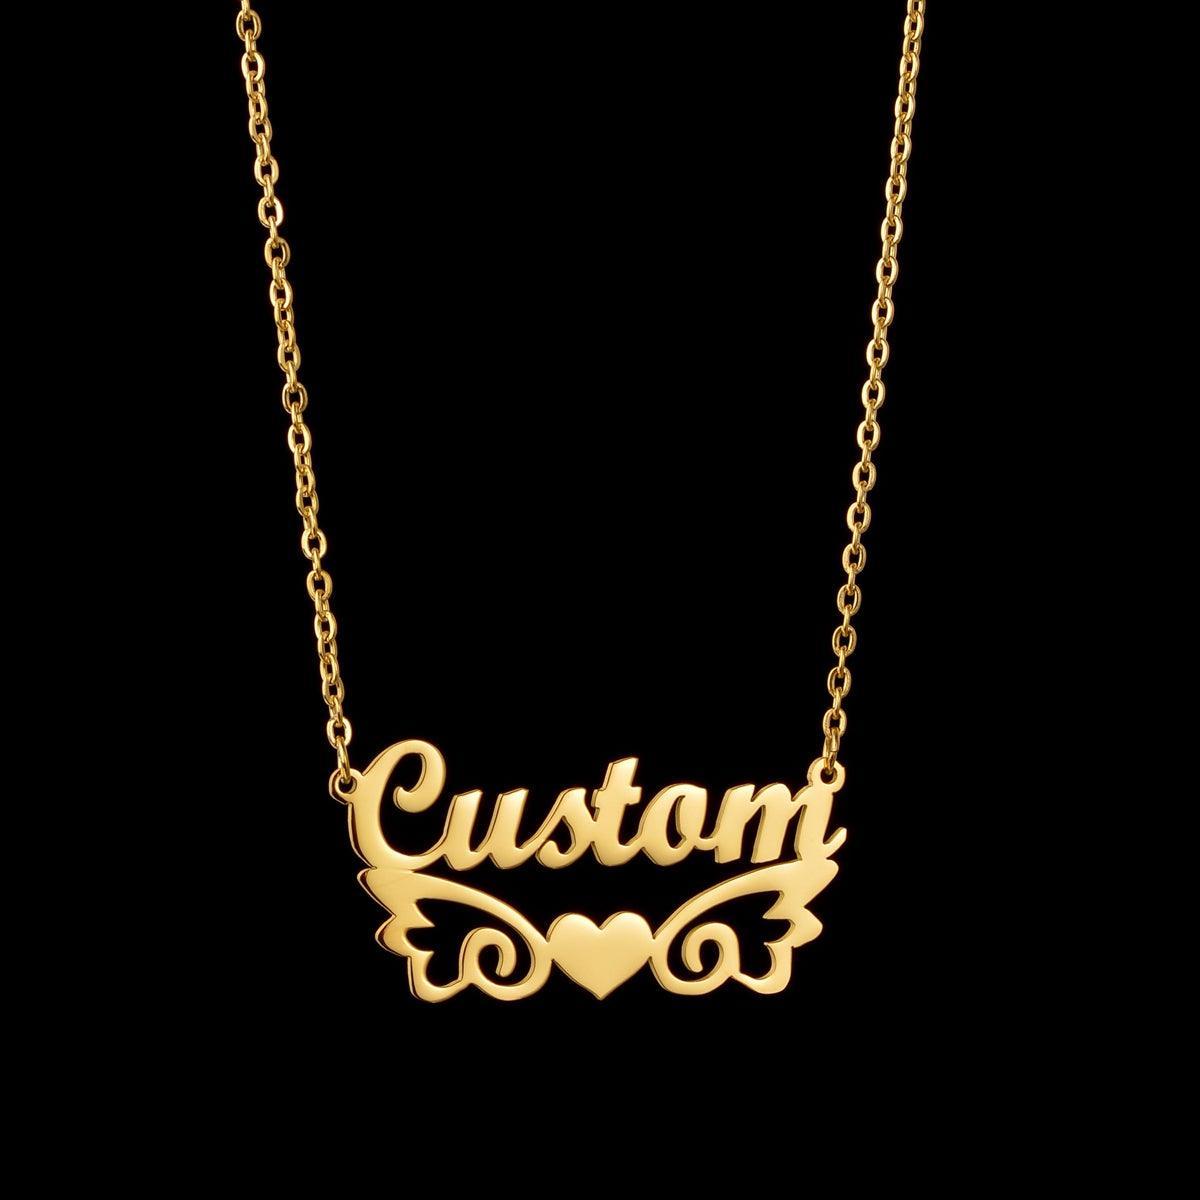 Personalized Custom Name Necklaces For Her in 2023 | Personalized Custom Name Necklaces For Her - undefined | Custom Name Necklace Personalized Necklace, Personalized Custom Diamond Necklaces, Personalized Custom Heart-shaped Letter Necklace, Personalized Frosted Custom Necklace | From Hunny Life | hunnylife.com